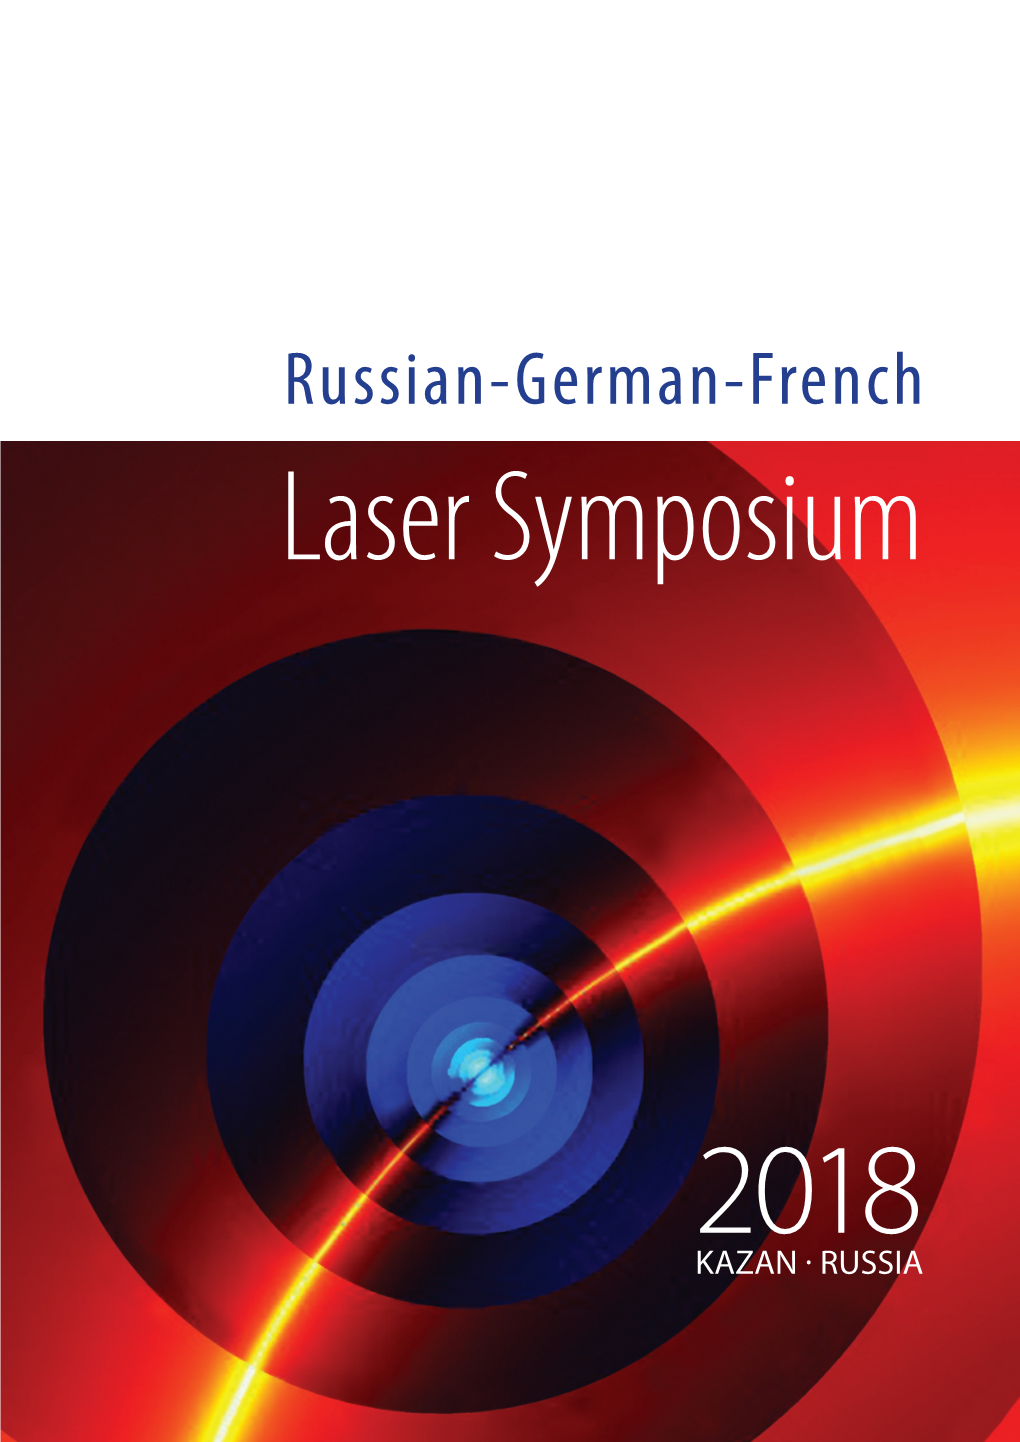 Russian-German-French Laser Symposium